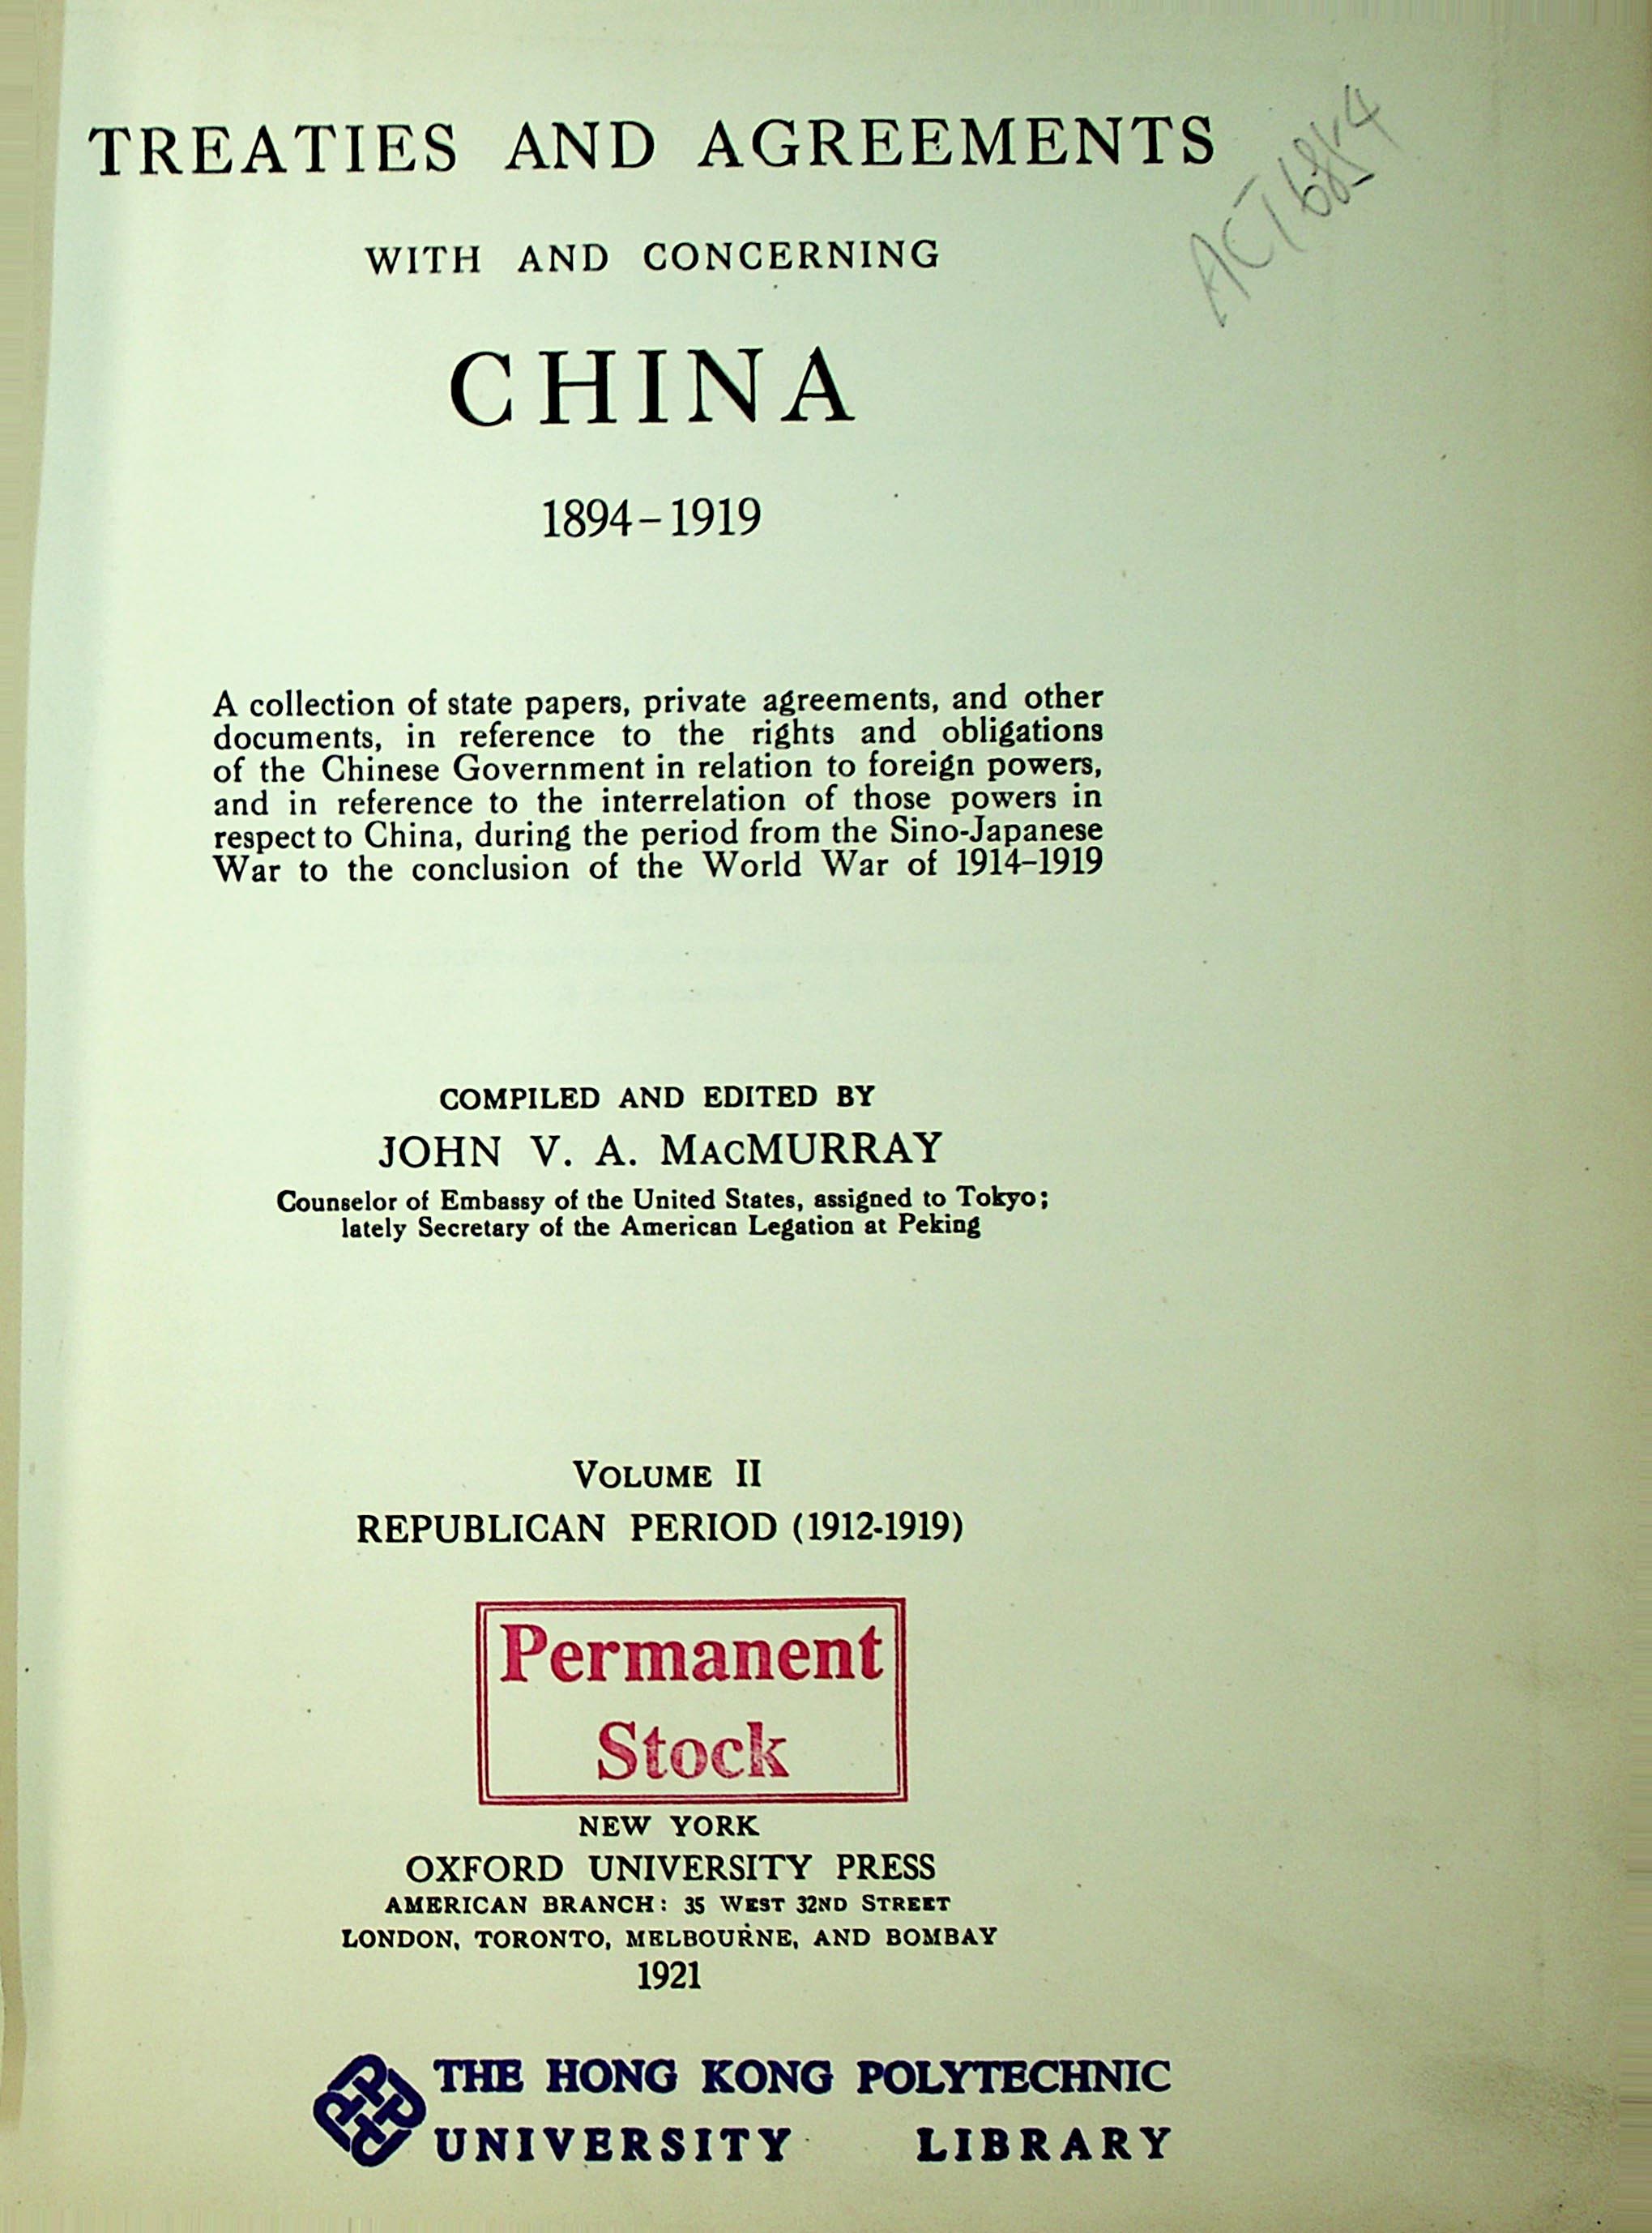 Treaties and agreements with and concerning China, 1894-1919 : a collection of state papers, private agreements, and other documents, in reference to the rights and obligations of the Chinese Government in relation to foreign powers, and in reference to the interrelation of those powers in respect to China, during the period from the Sino-Japanese War to the conclusion of the World War of 1914-1919. Volume 2